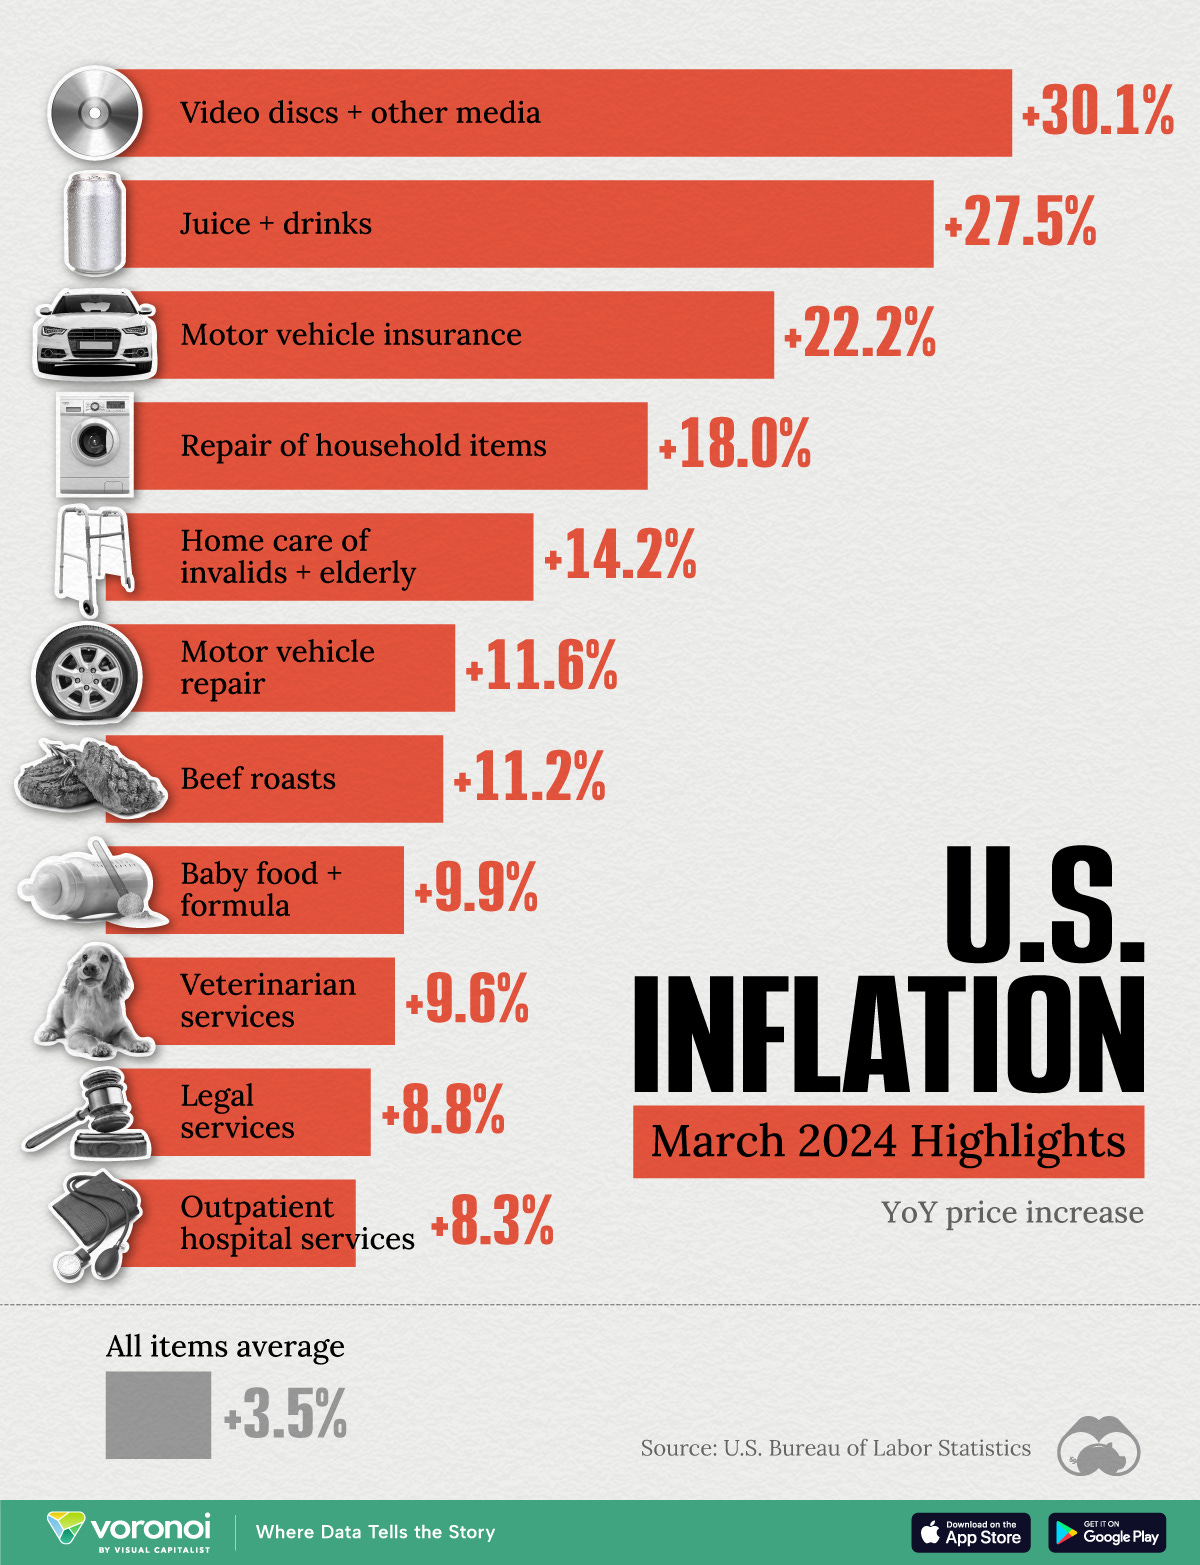 Chart showing the top categories for U.S. inflation in March 2024